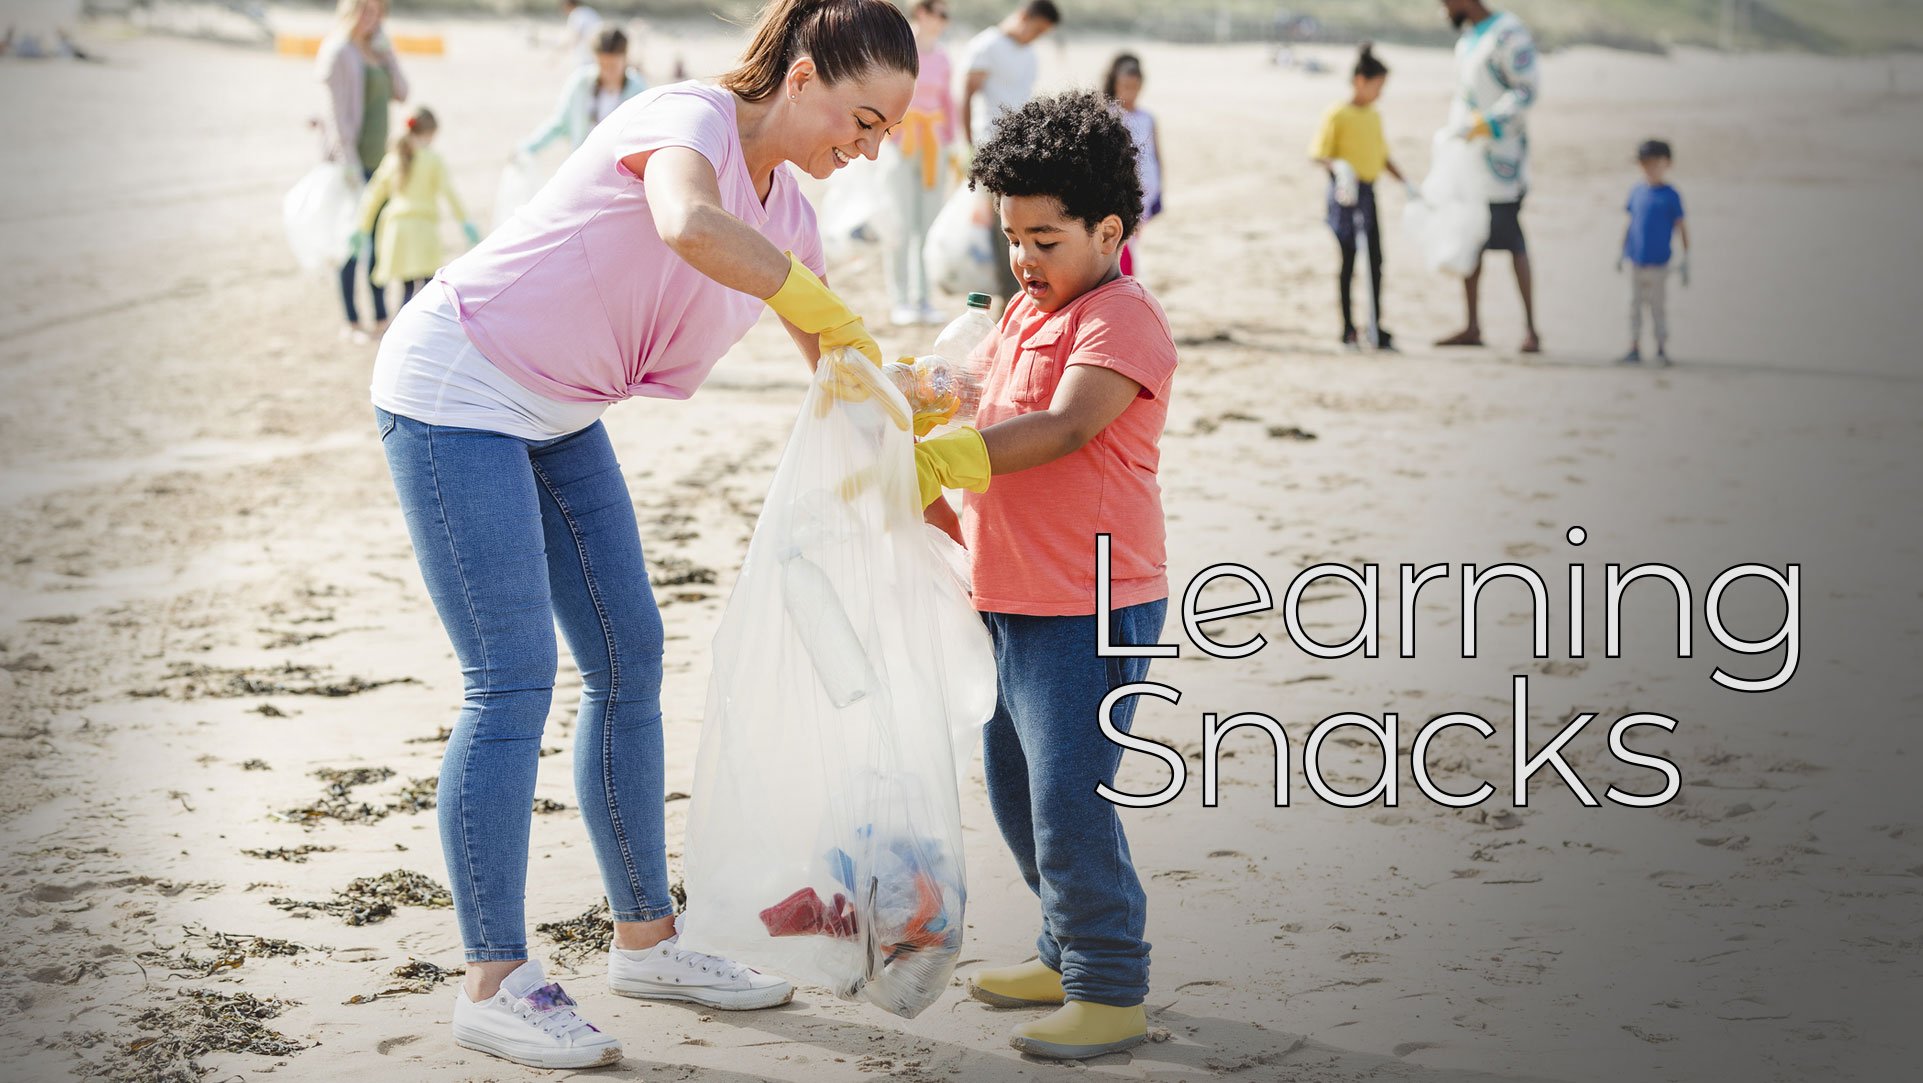 Learning Snacks - Combating Plastic Pollution